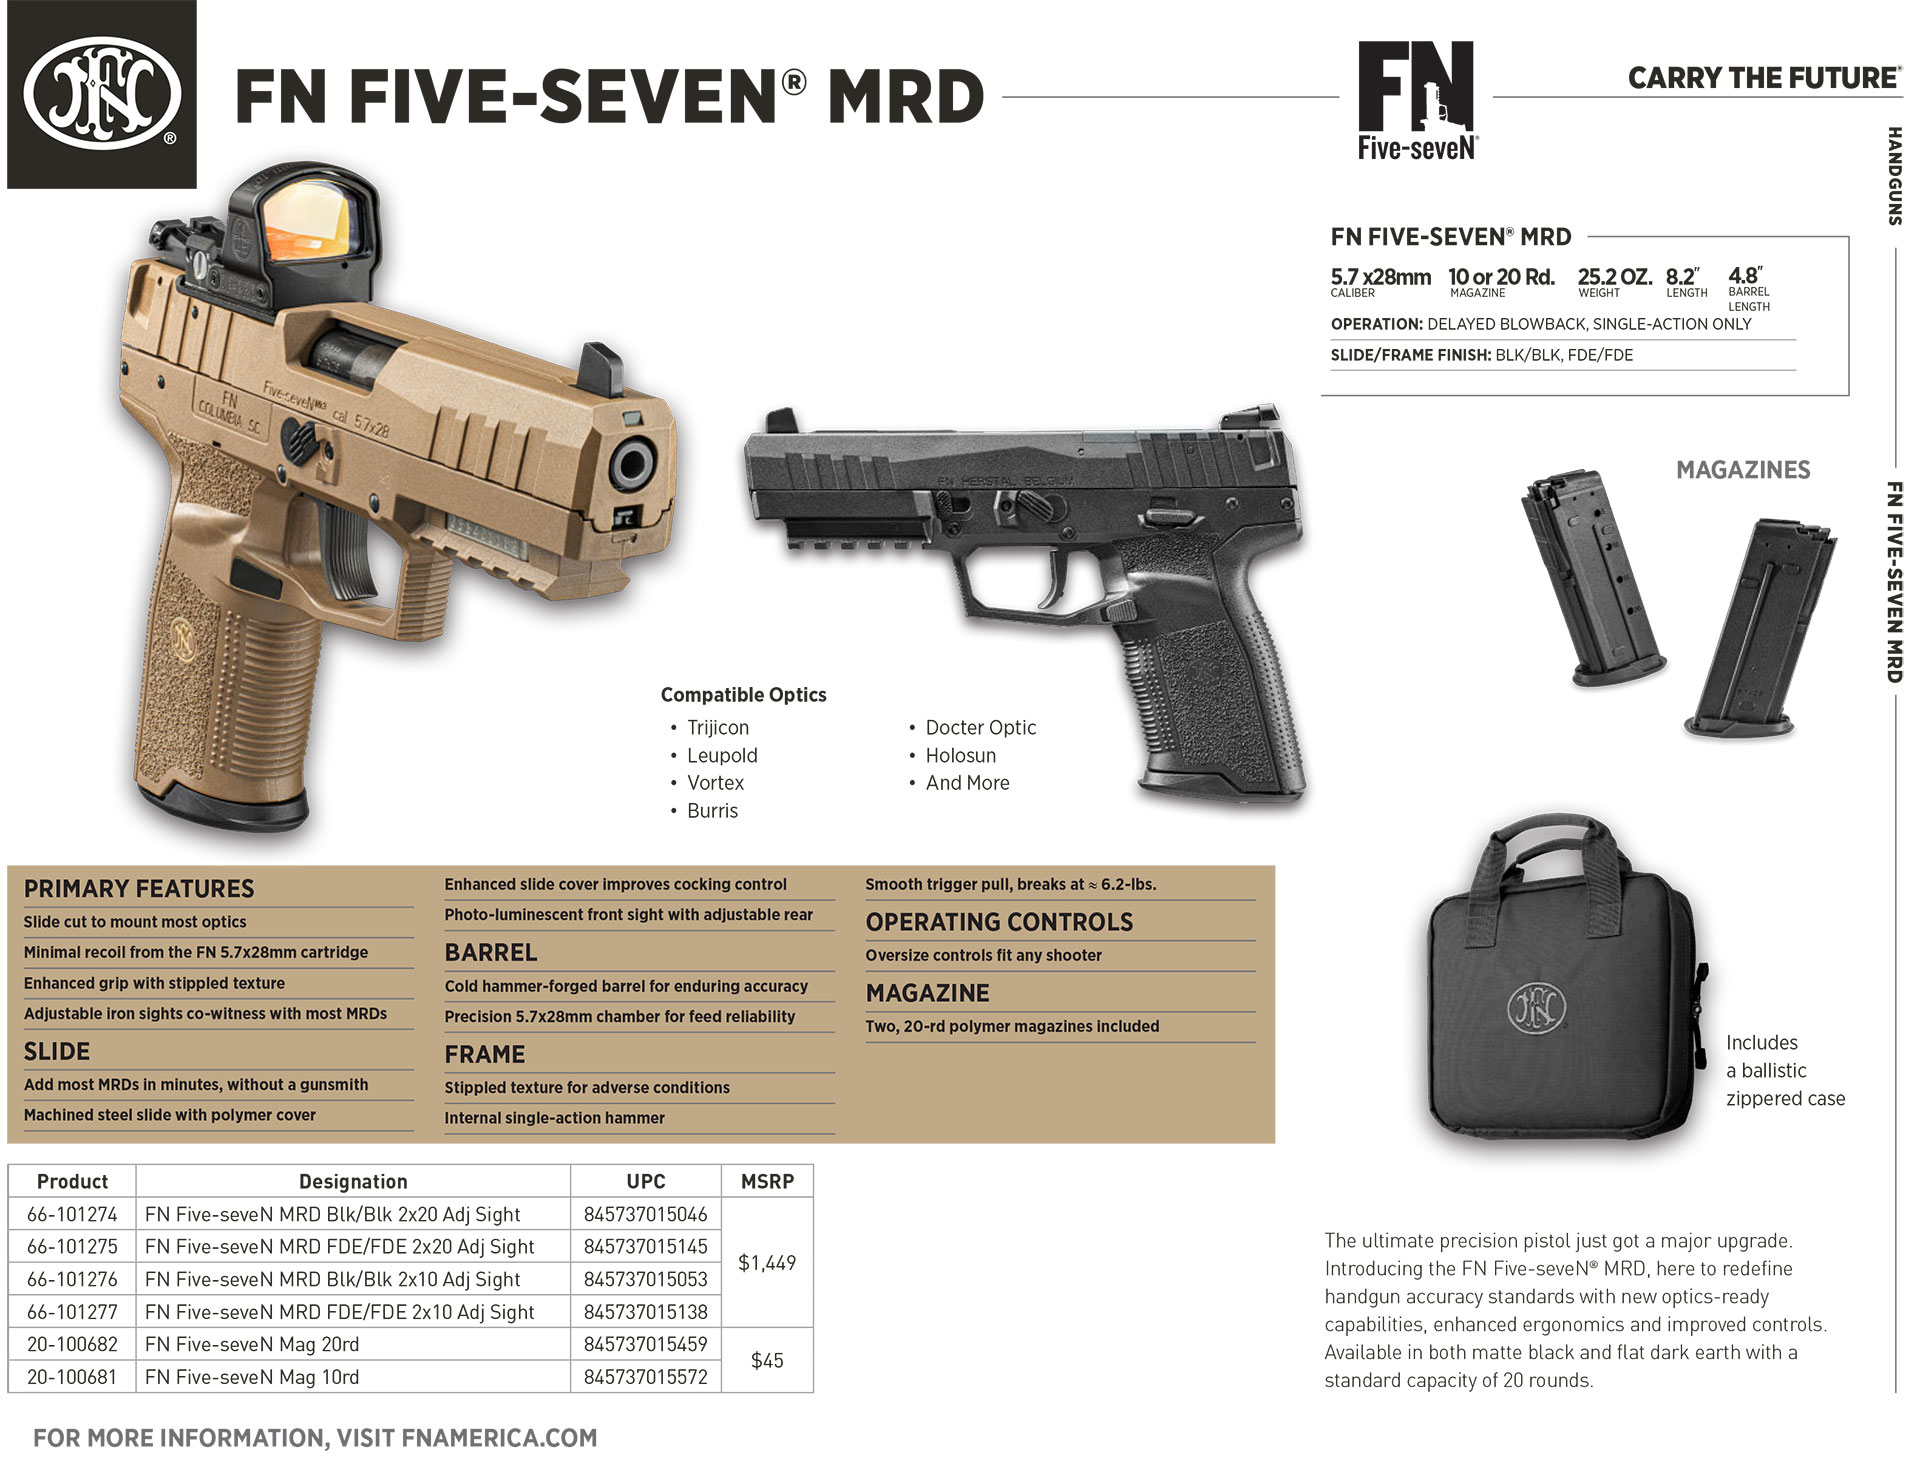 FN American new for 2022 FN Five-seveN MRD optic-ready semi-automatic pistol chambered in 5.7x28 mm FN.